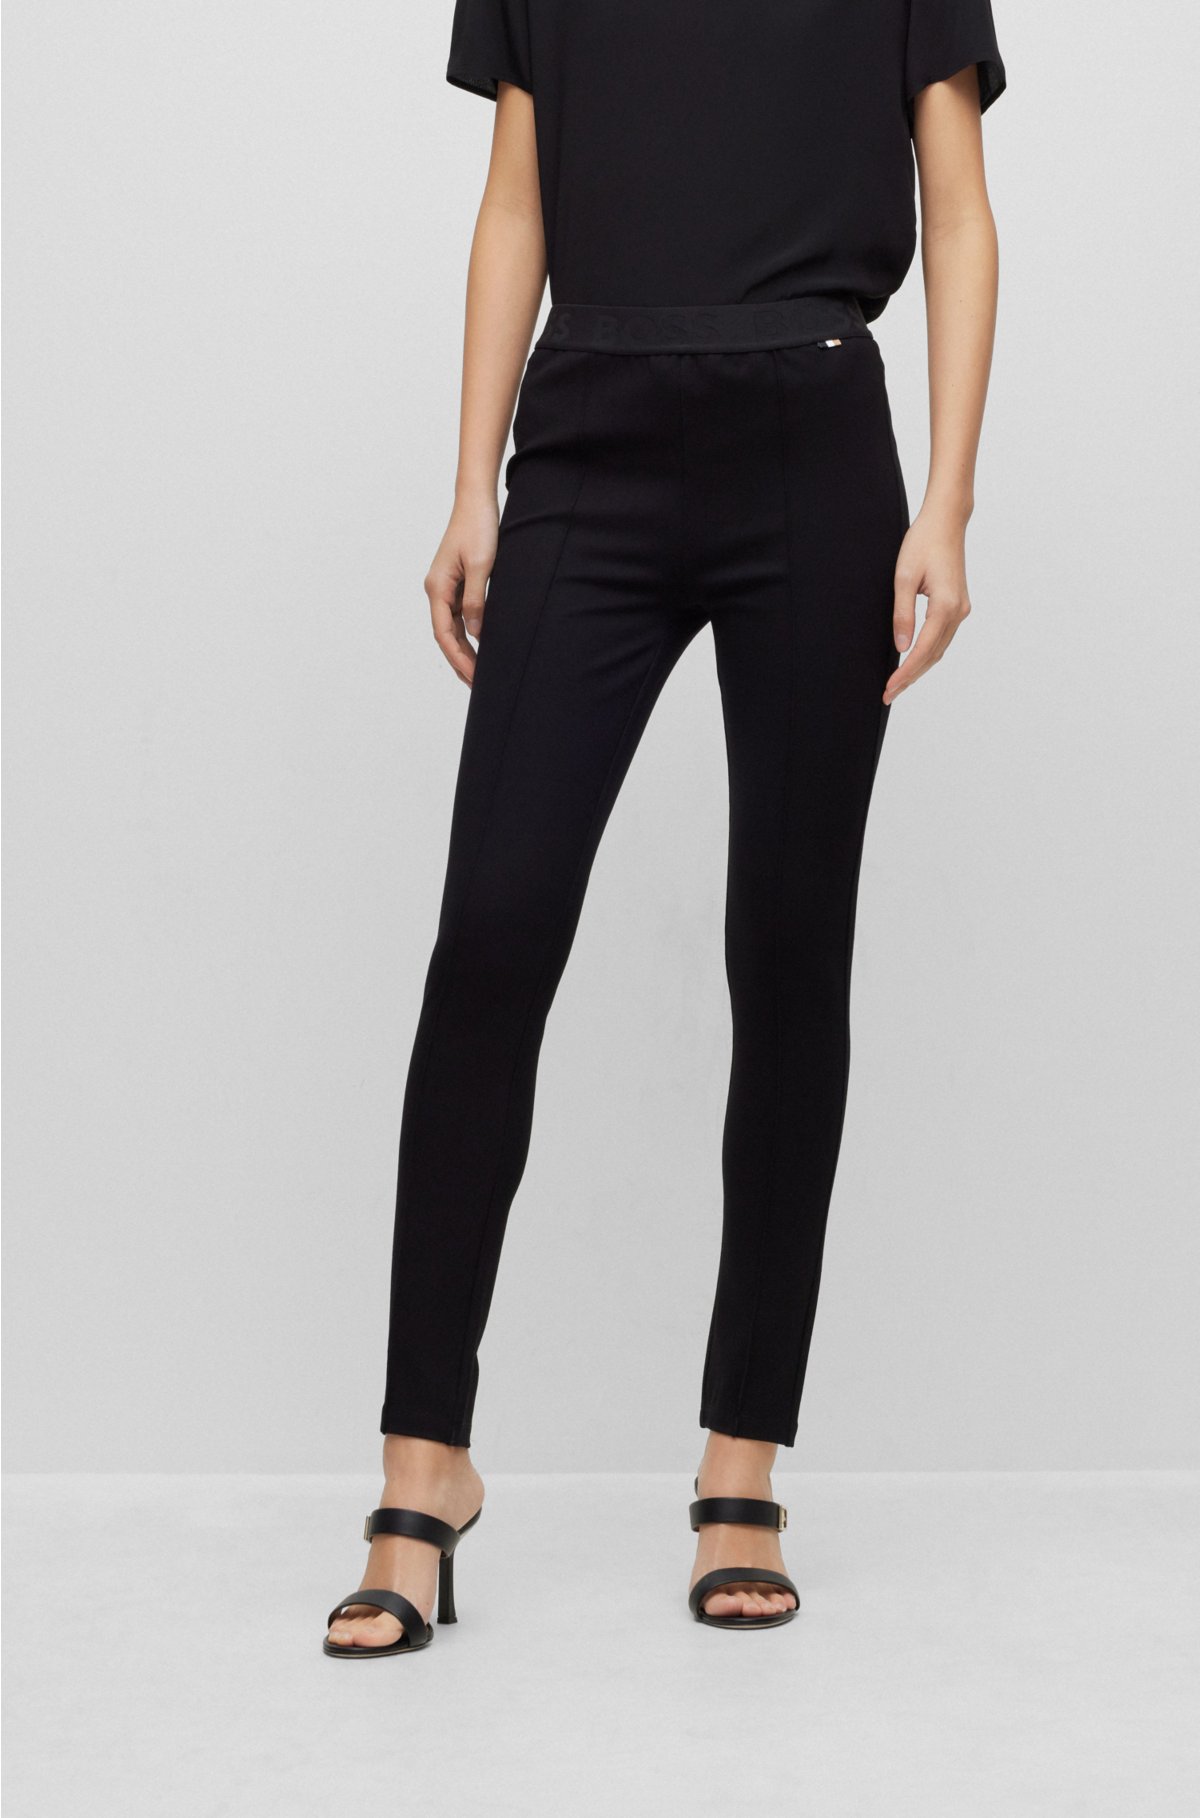 BOSS - Slim-fit leggings in stretch jersey with logo waistband